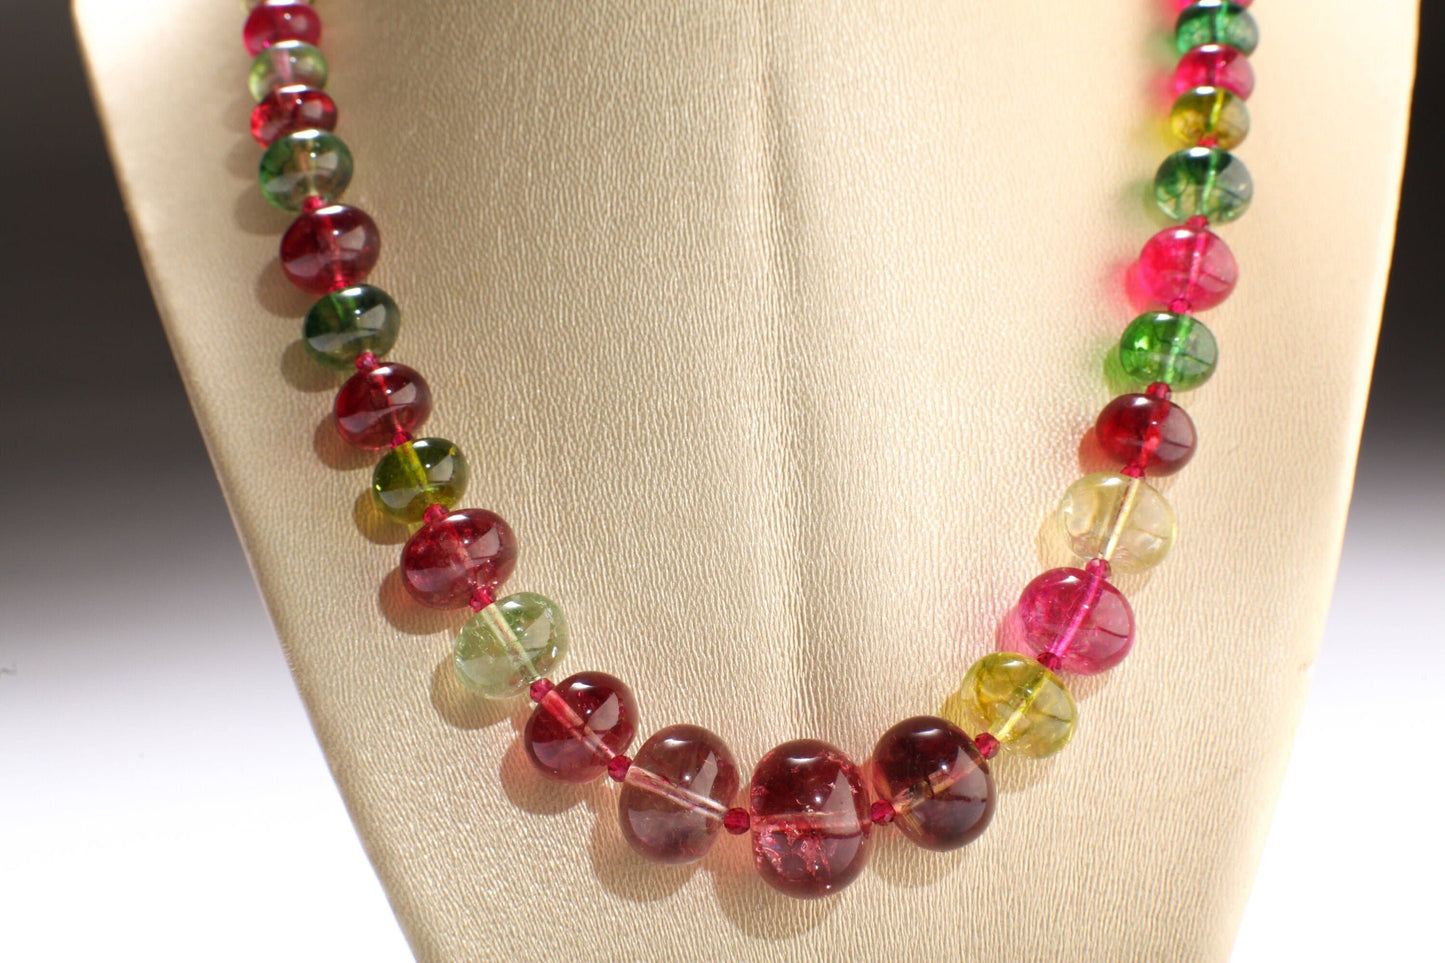 Natural Rock Crystal Graduated Necklace, Multi Color Crystal Quartz 8-17mm Rondell with Faceted Pink Spinel Accent Spacer Beads 19&quot; Necklace